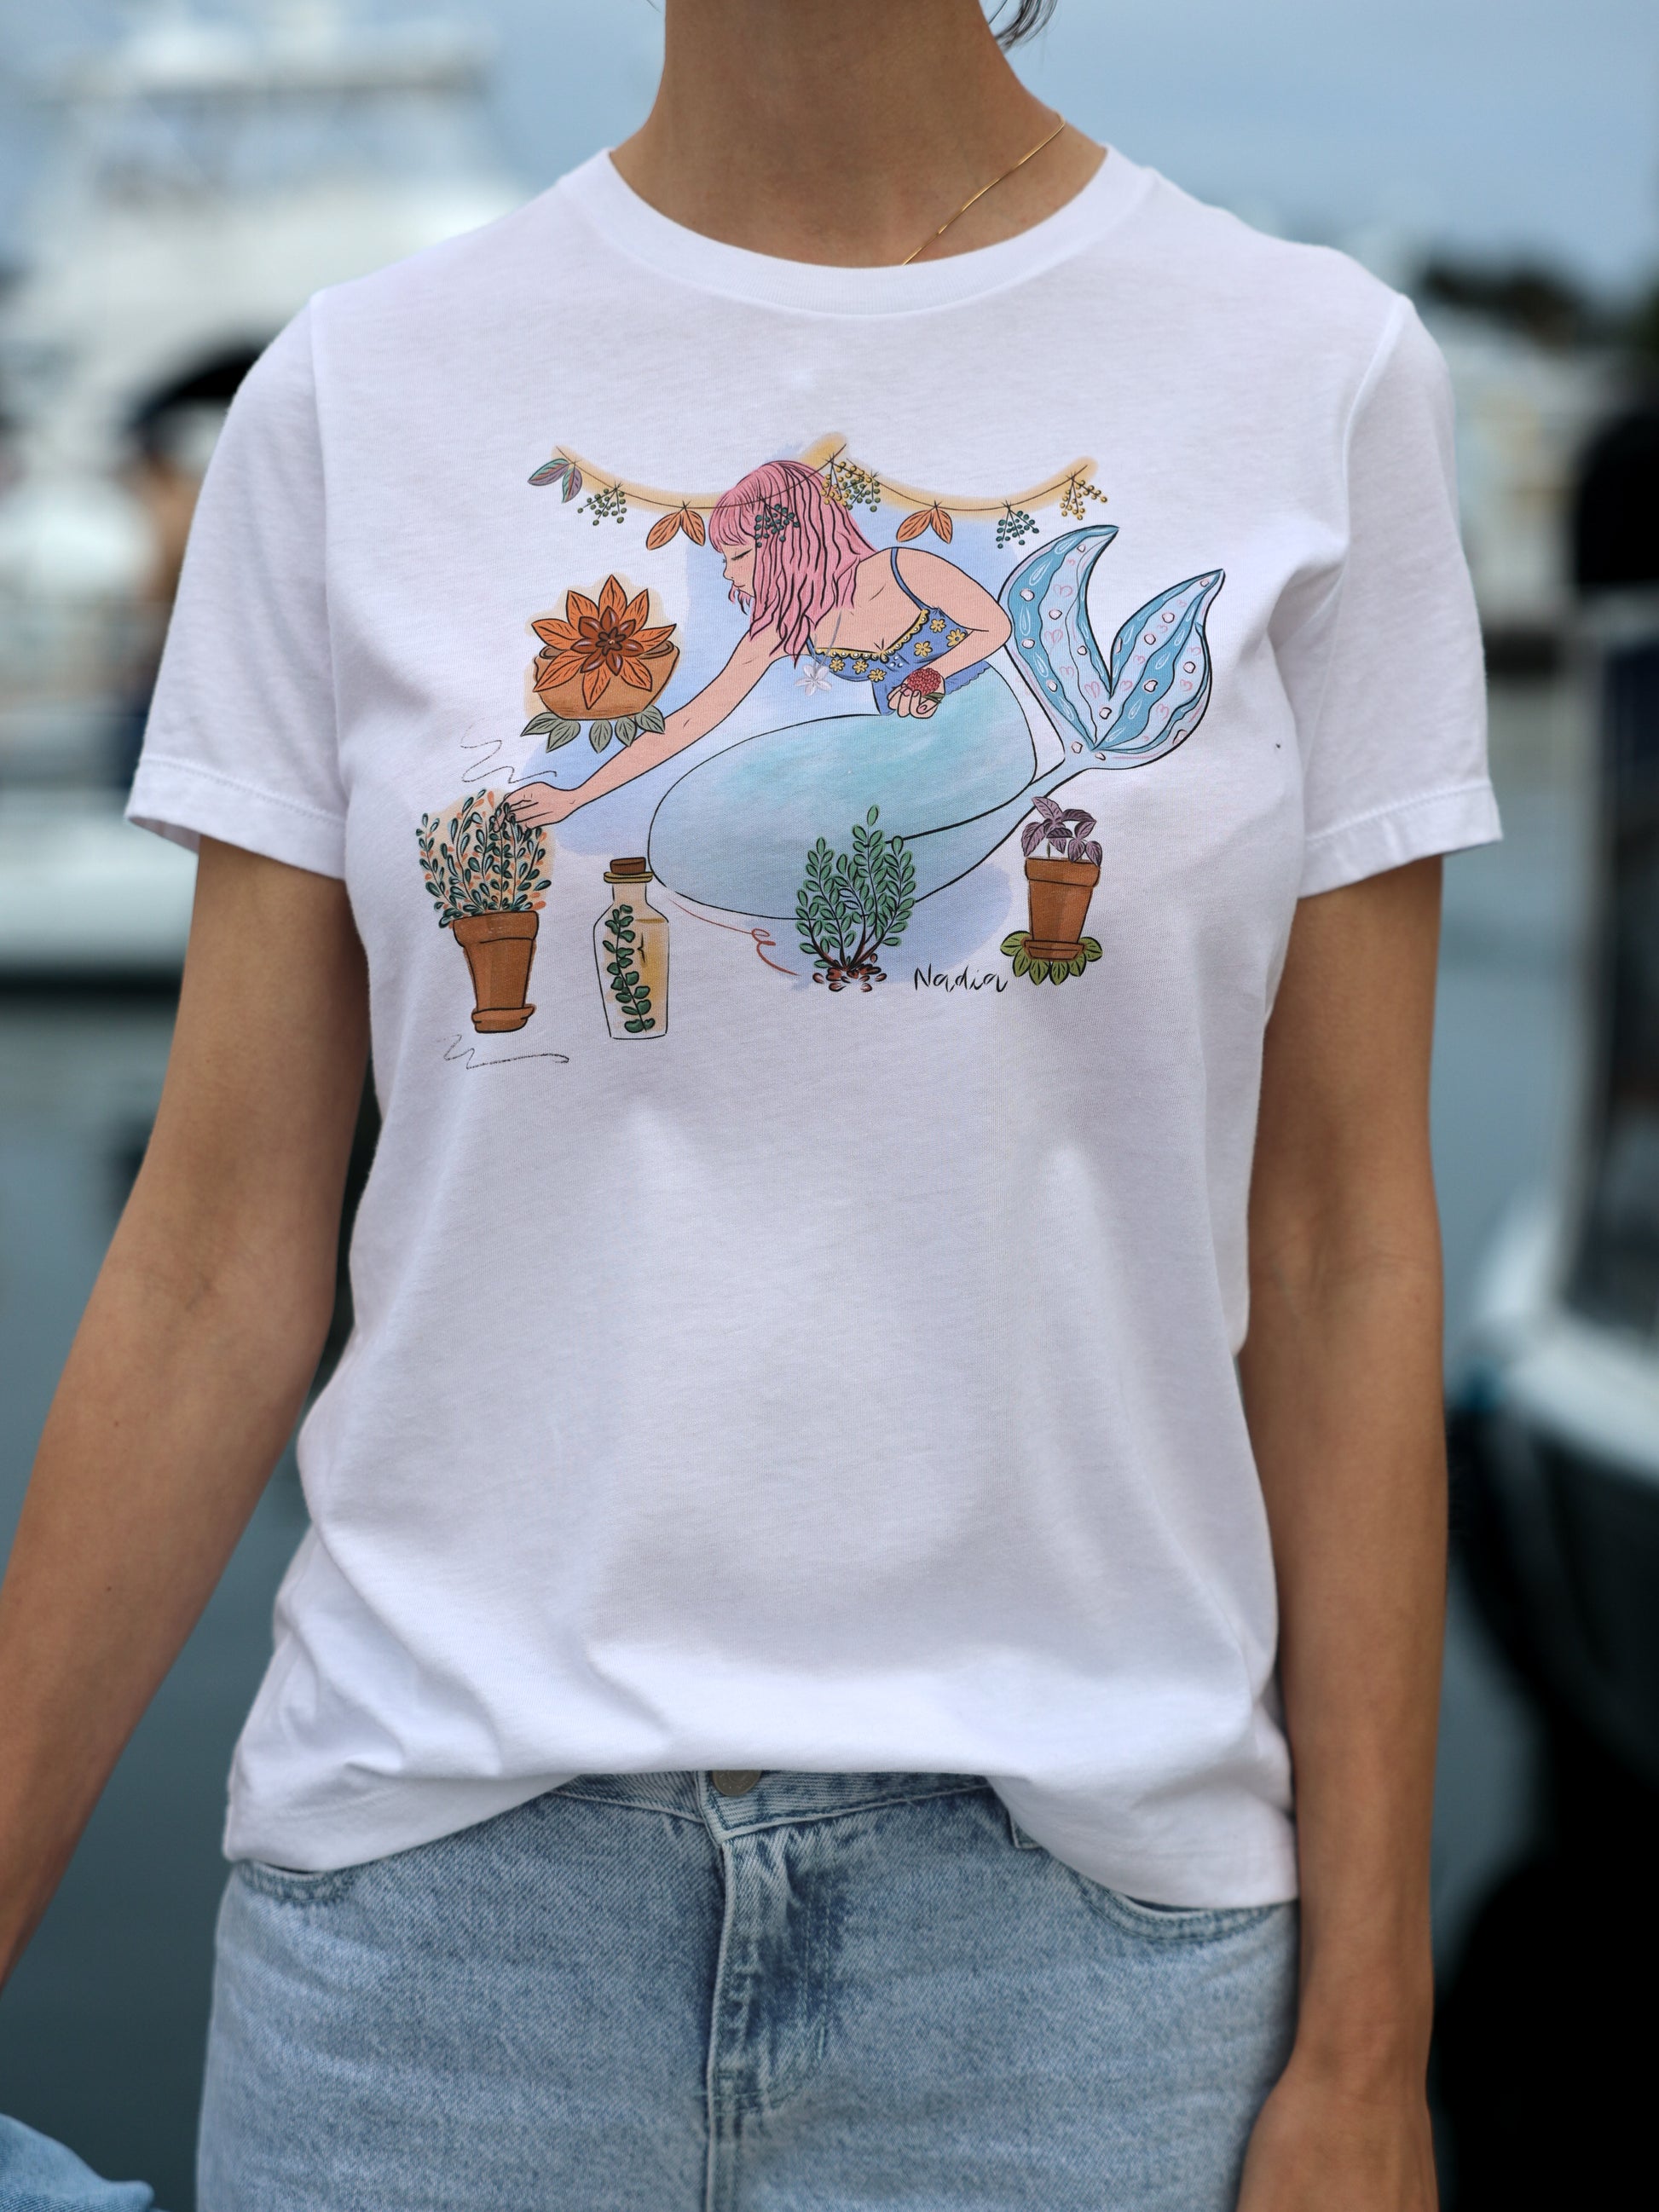 Mermaid tee featuring a hand-illustrated design of a pink-haired mermaid surrounded by herbs and seaweed, symbolizing growth and harmony between ocean and earth